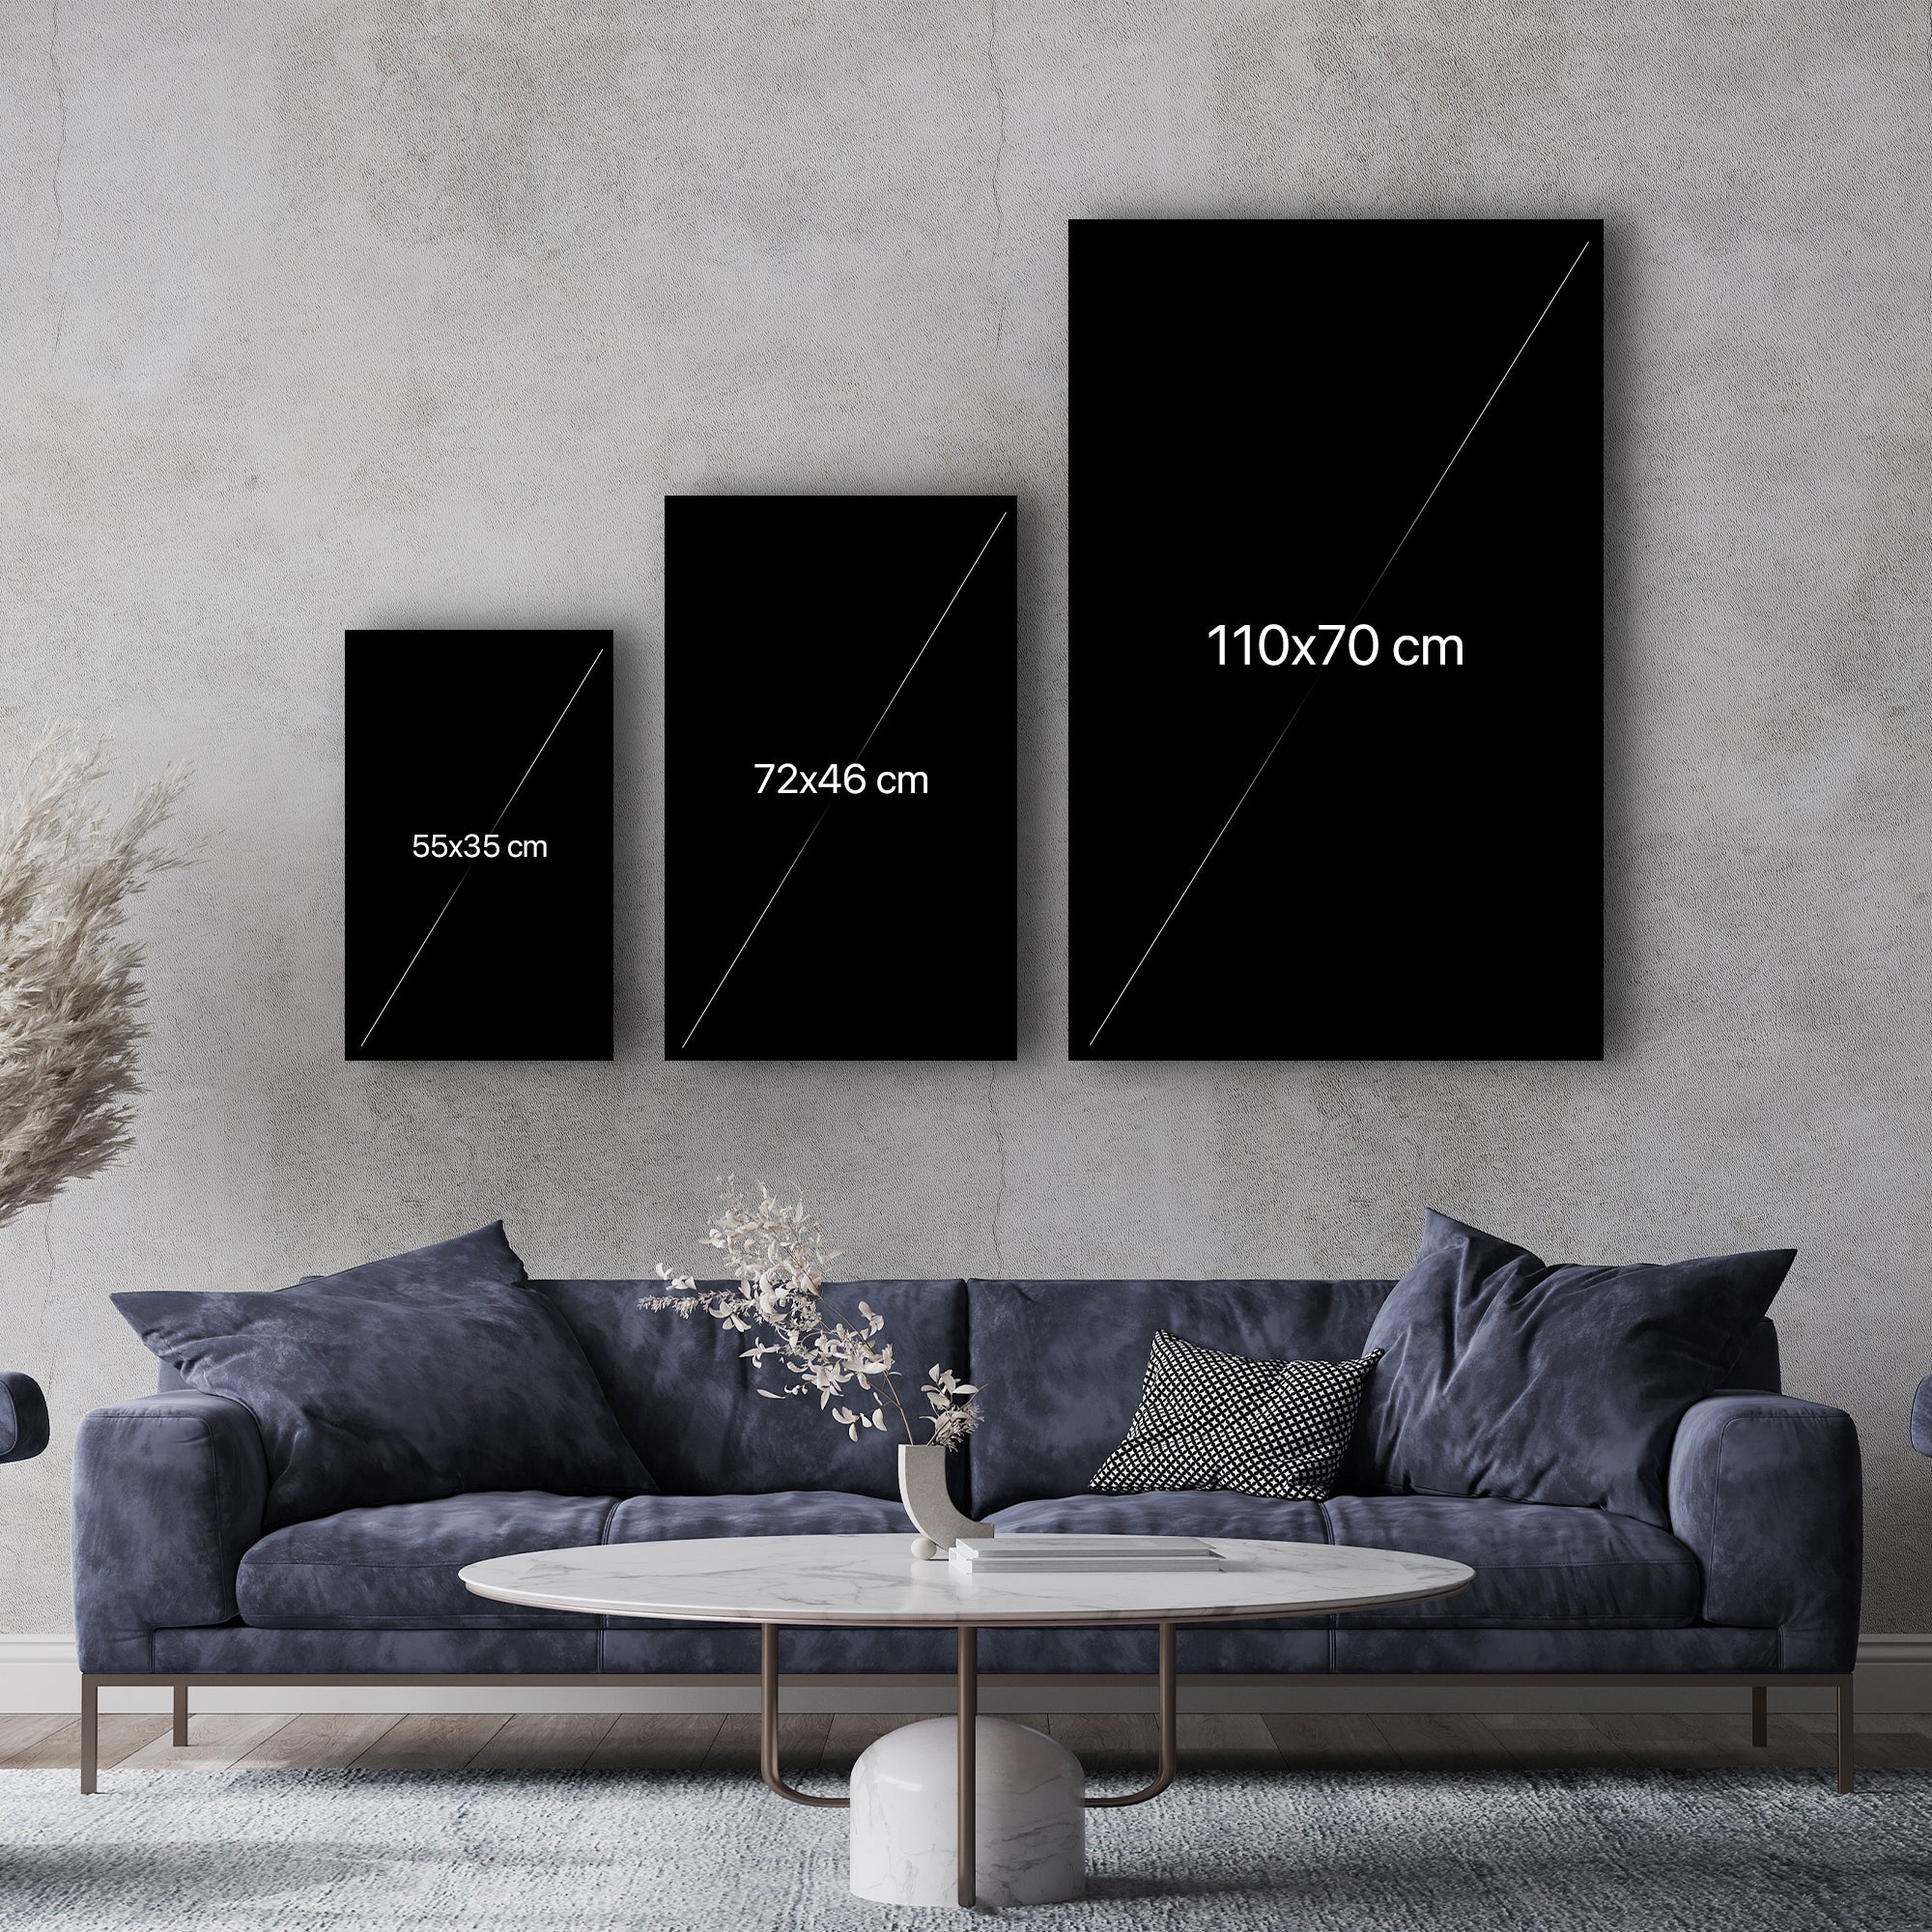 Call Me | Designers Collection Glass Wall Art